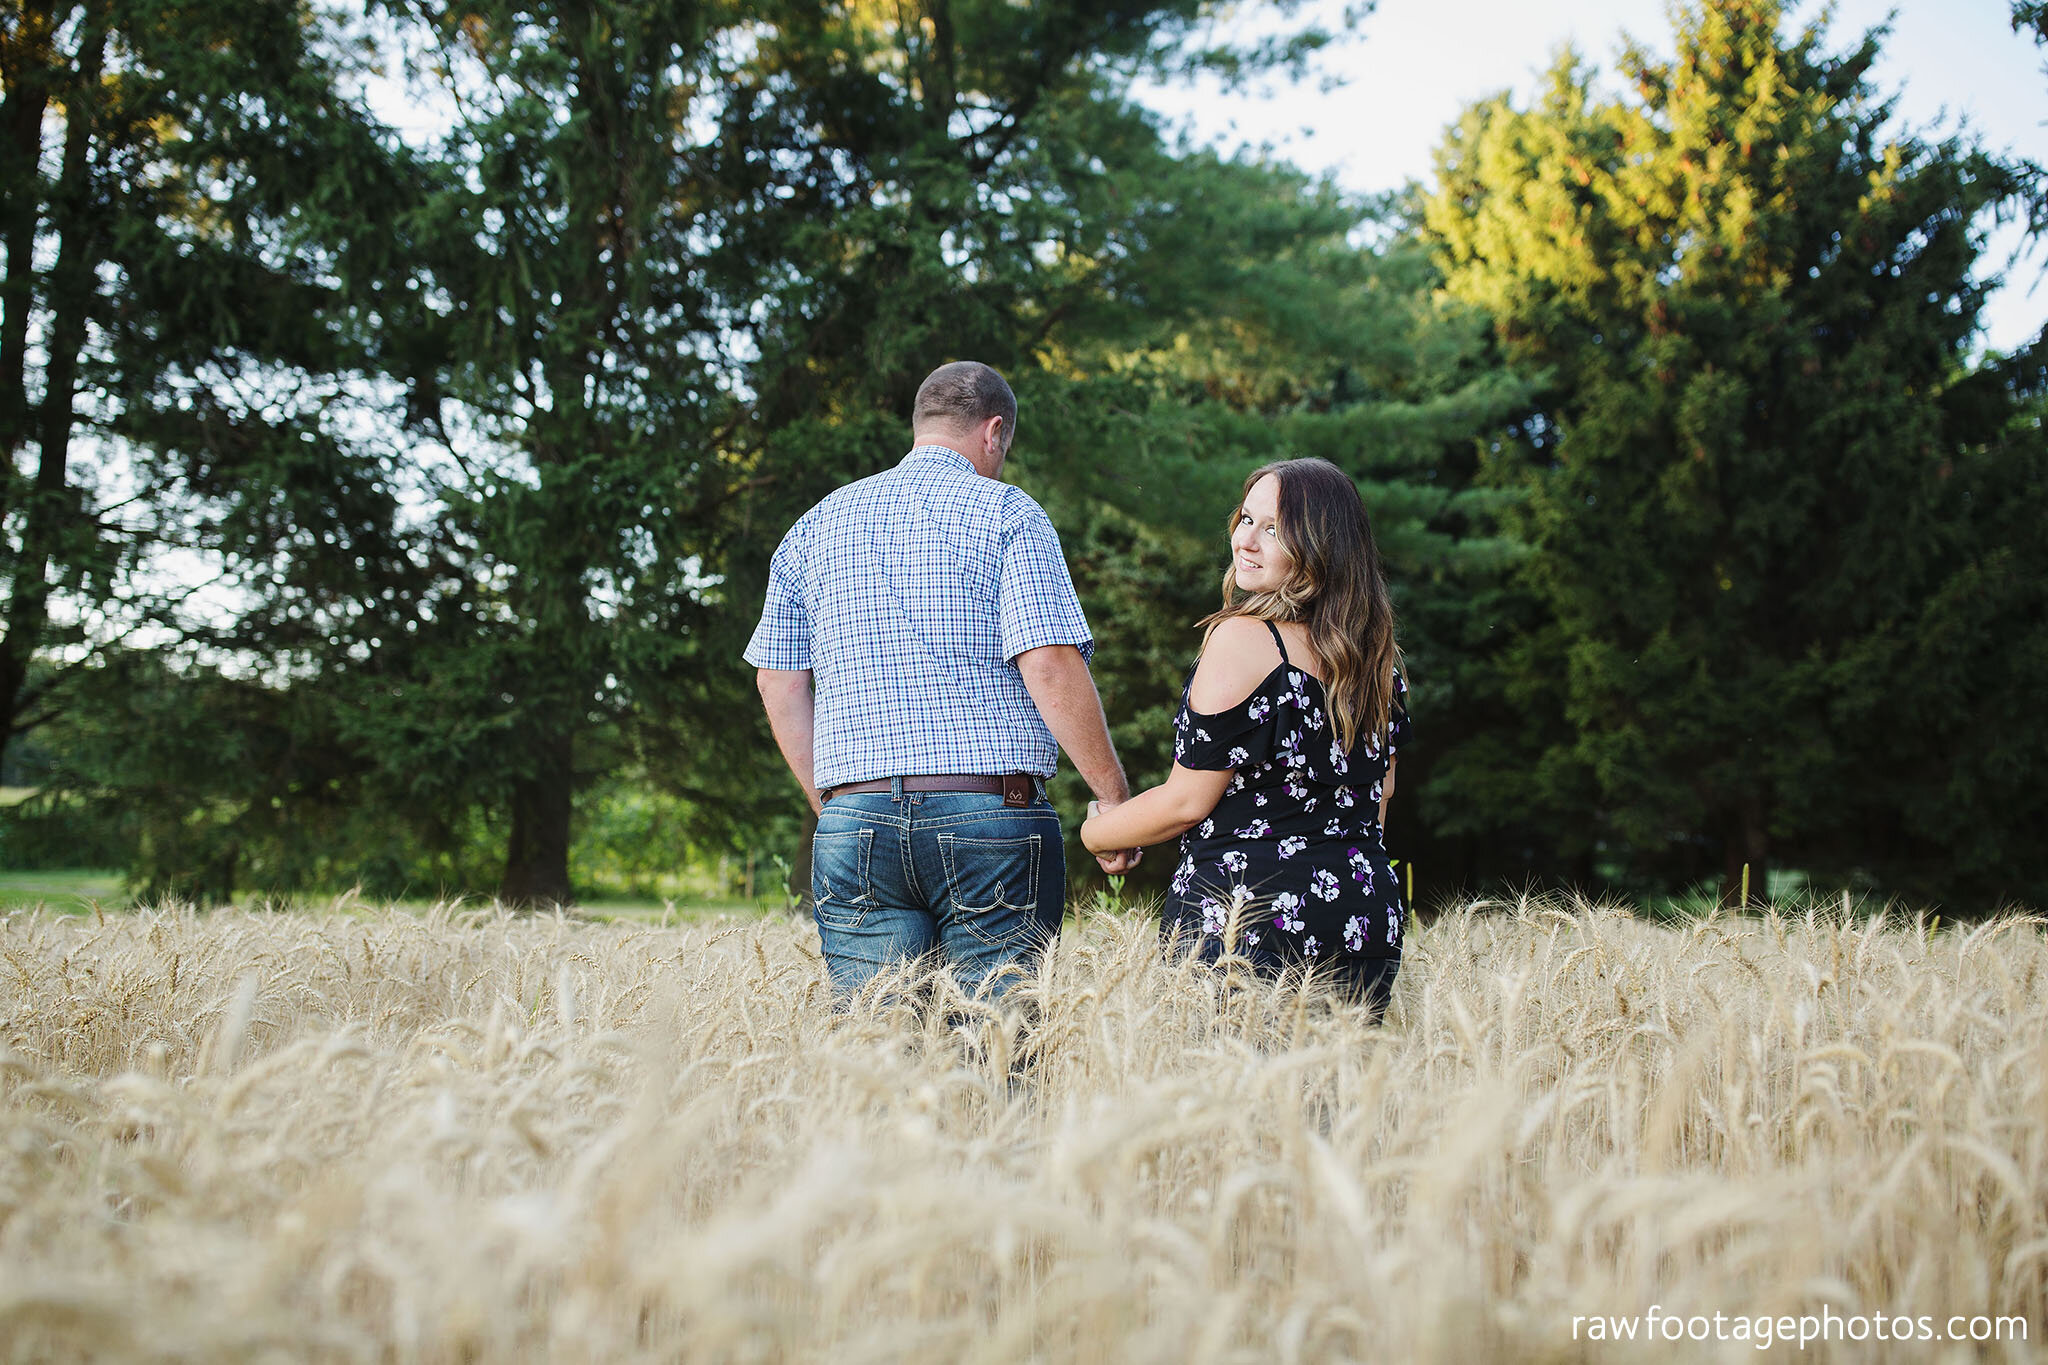 london_ontario_wedding_photographer-engagement_session-farm_engagement-country_e_session-raw_footage_photography-corn_field-015.jpg